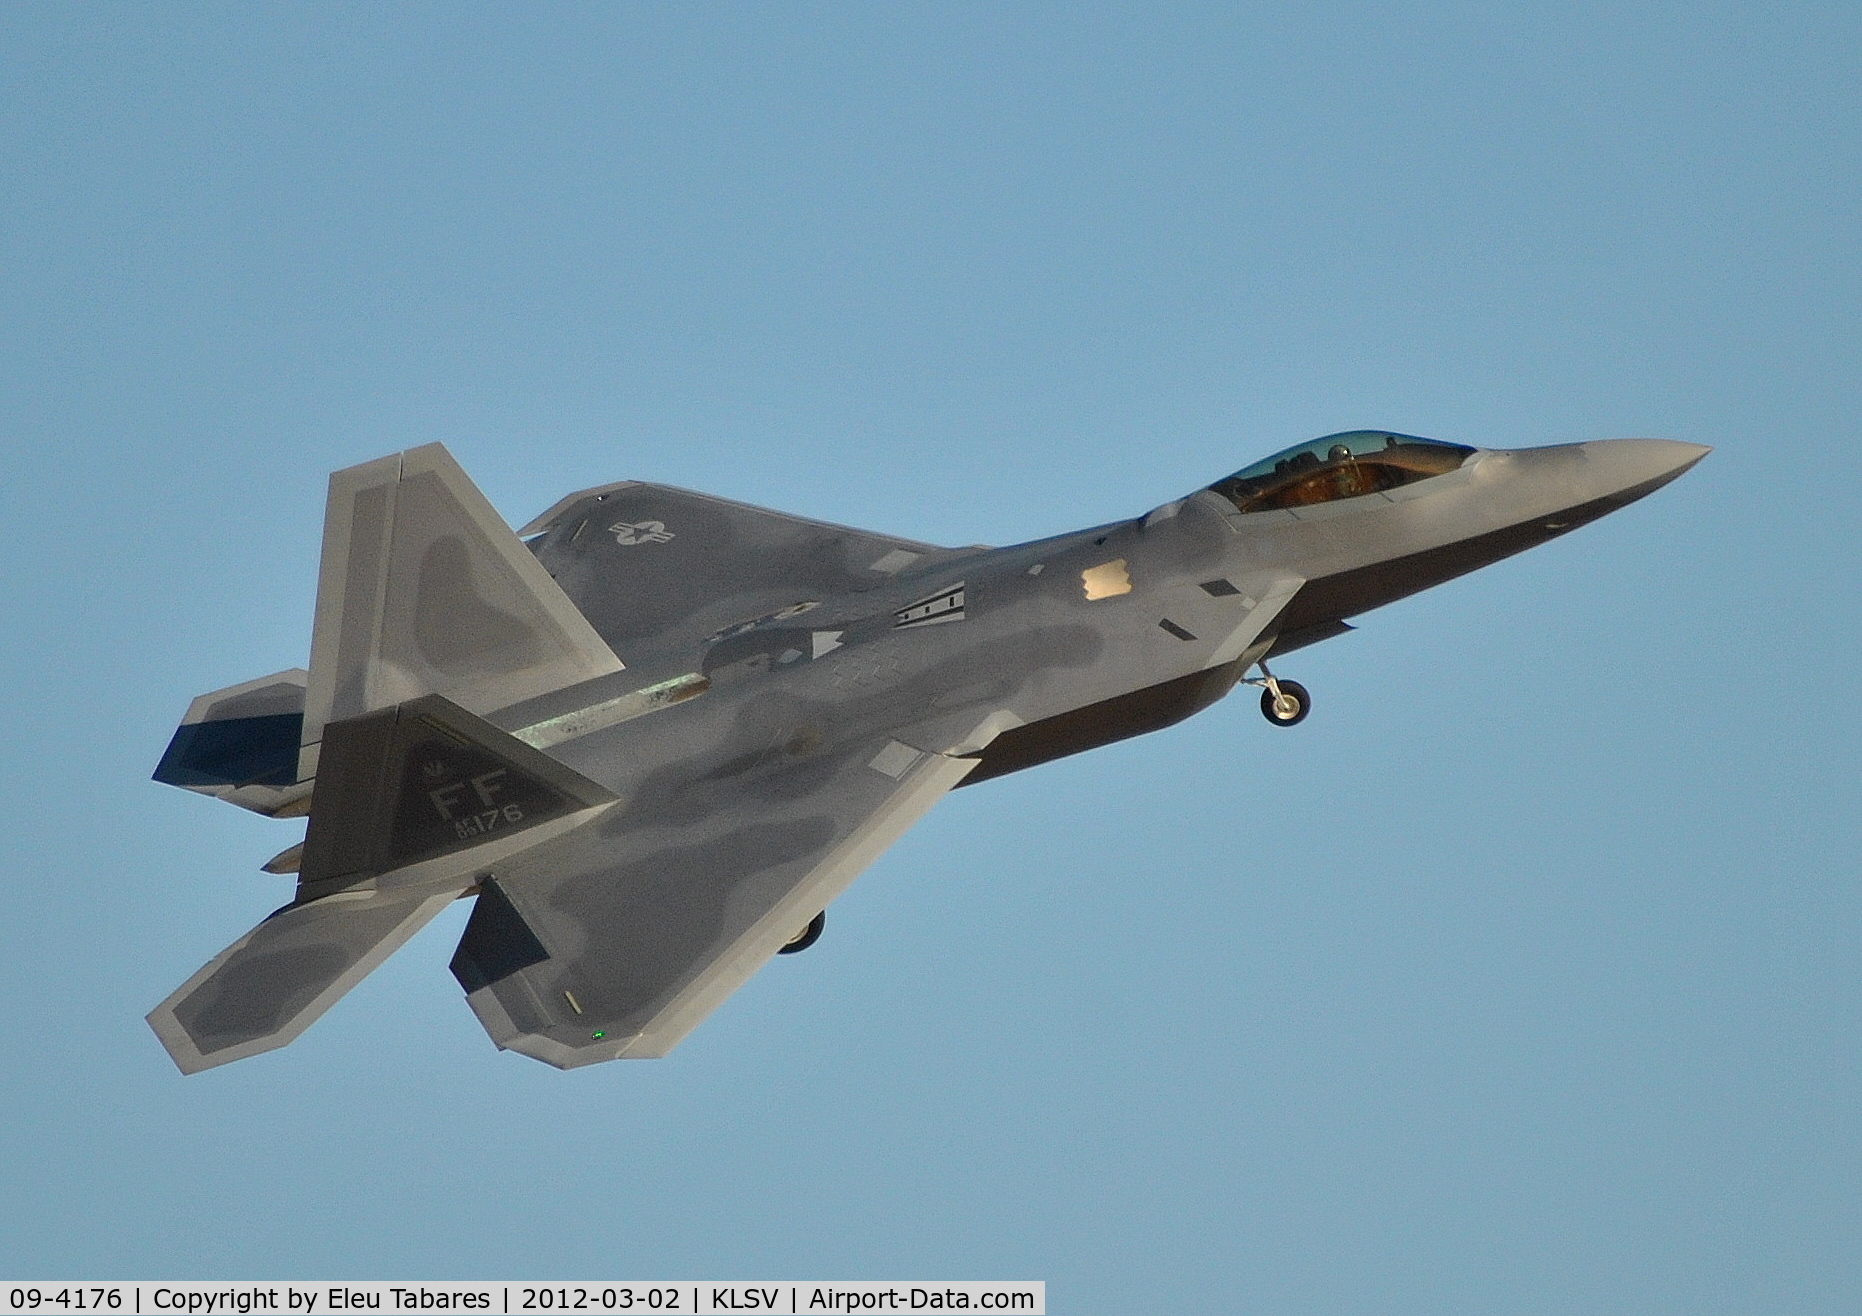 09-4176, Lockheed Martin F-22A Raptor C/N 4176, Taken during Red Flag Exercise at Nellis Air Force Base, Nevada.